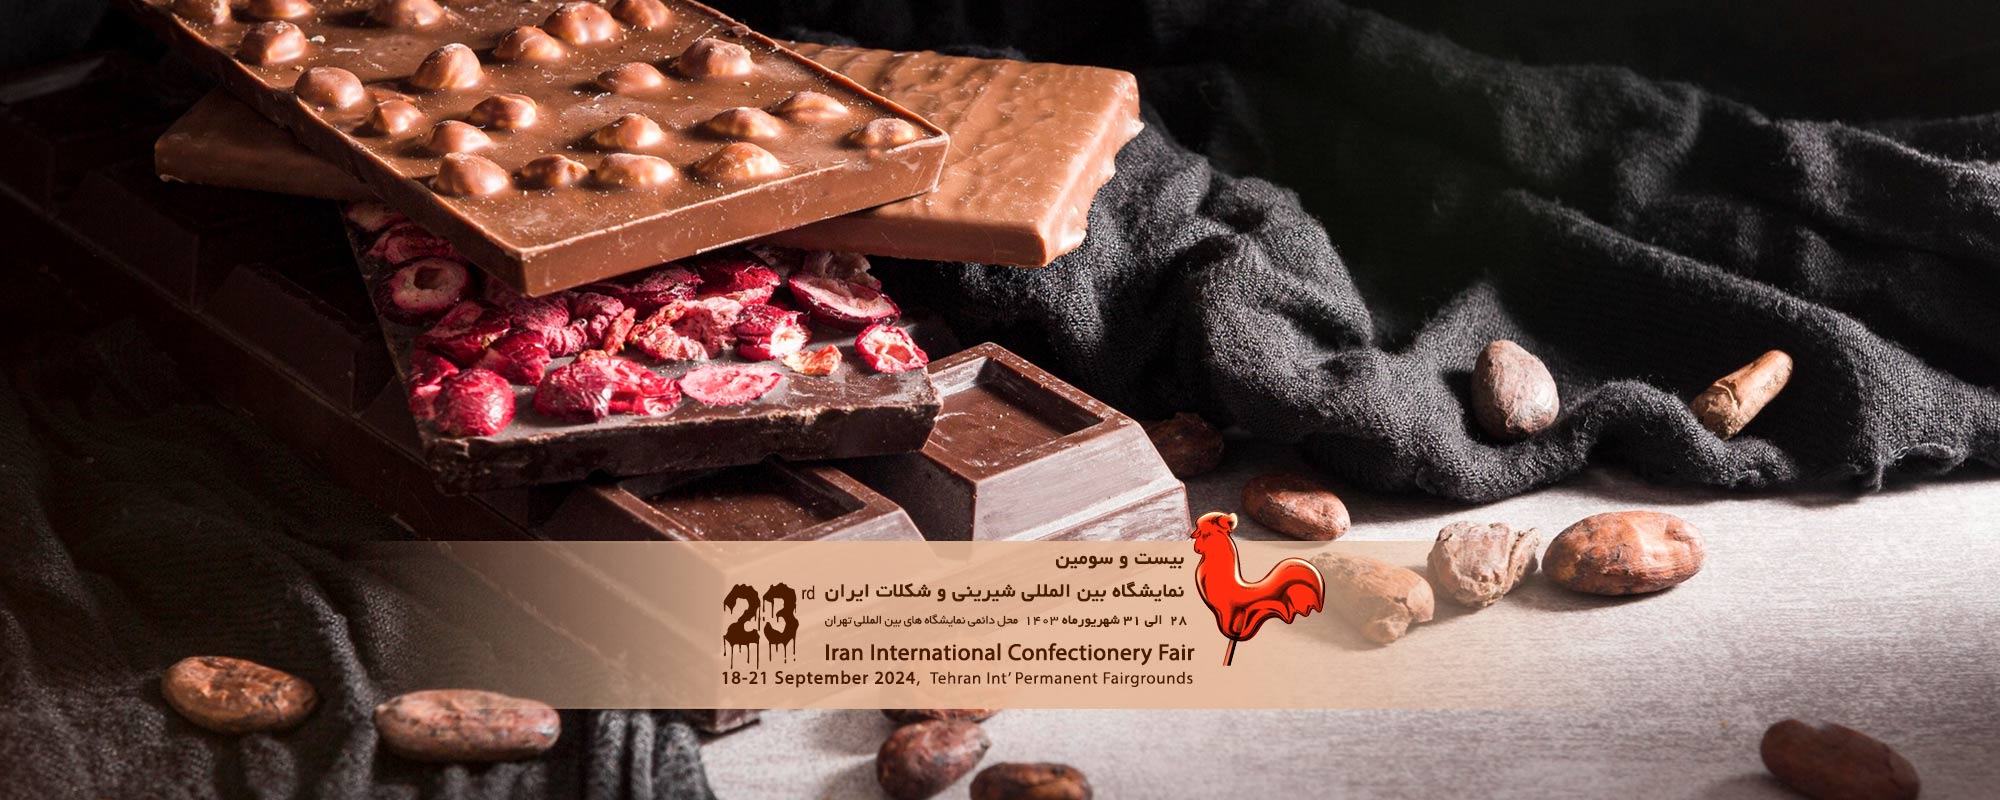 s1 - The 23rd Iran International Confectionery Fair 2024